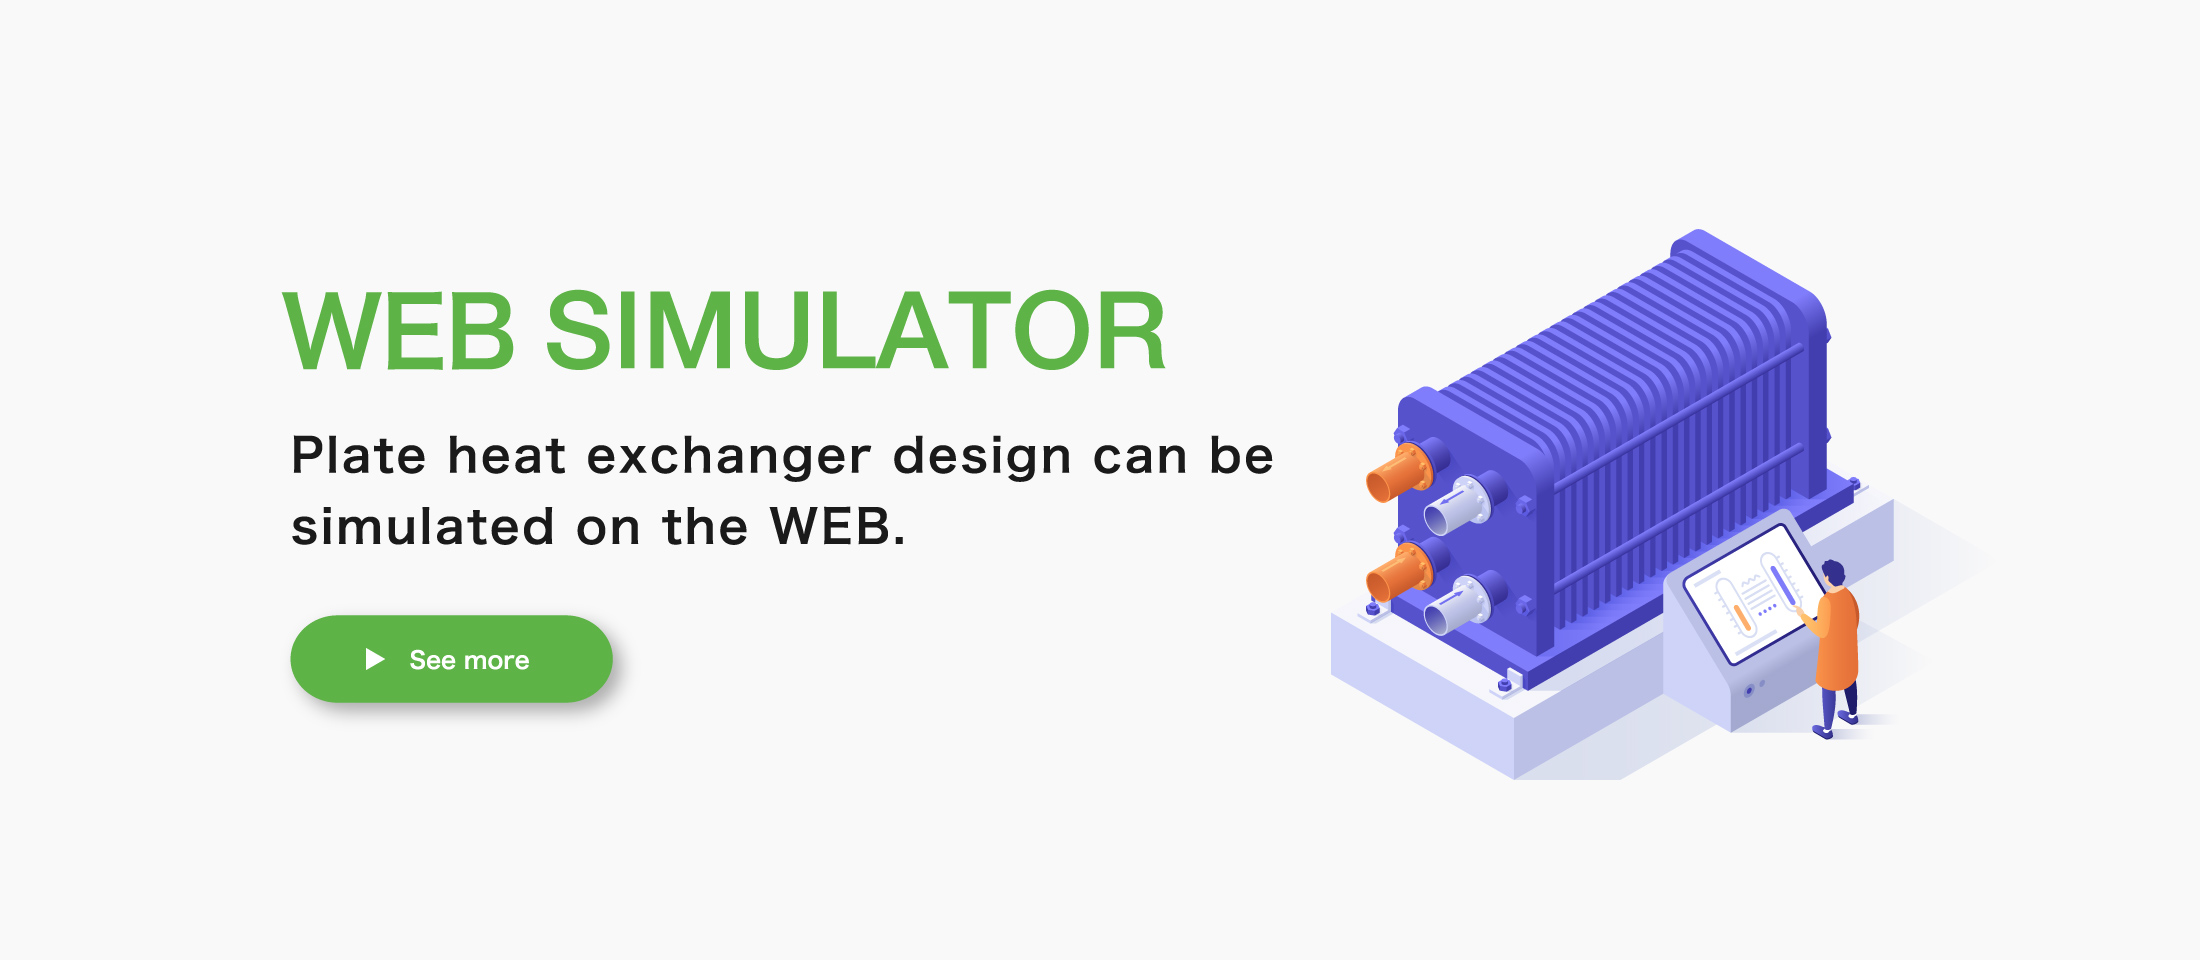 WEB SIMULATOR Plate heat exchanger design can be simulated on the WEB.